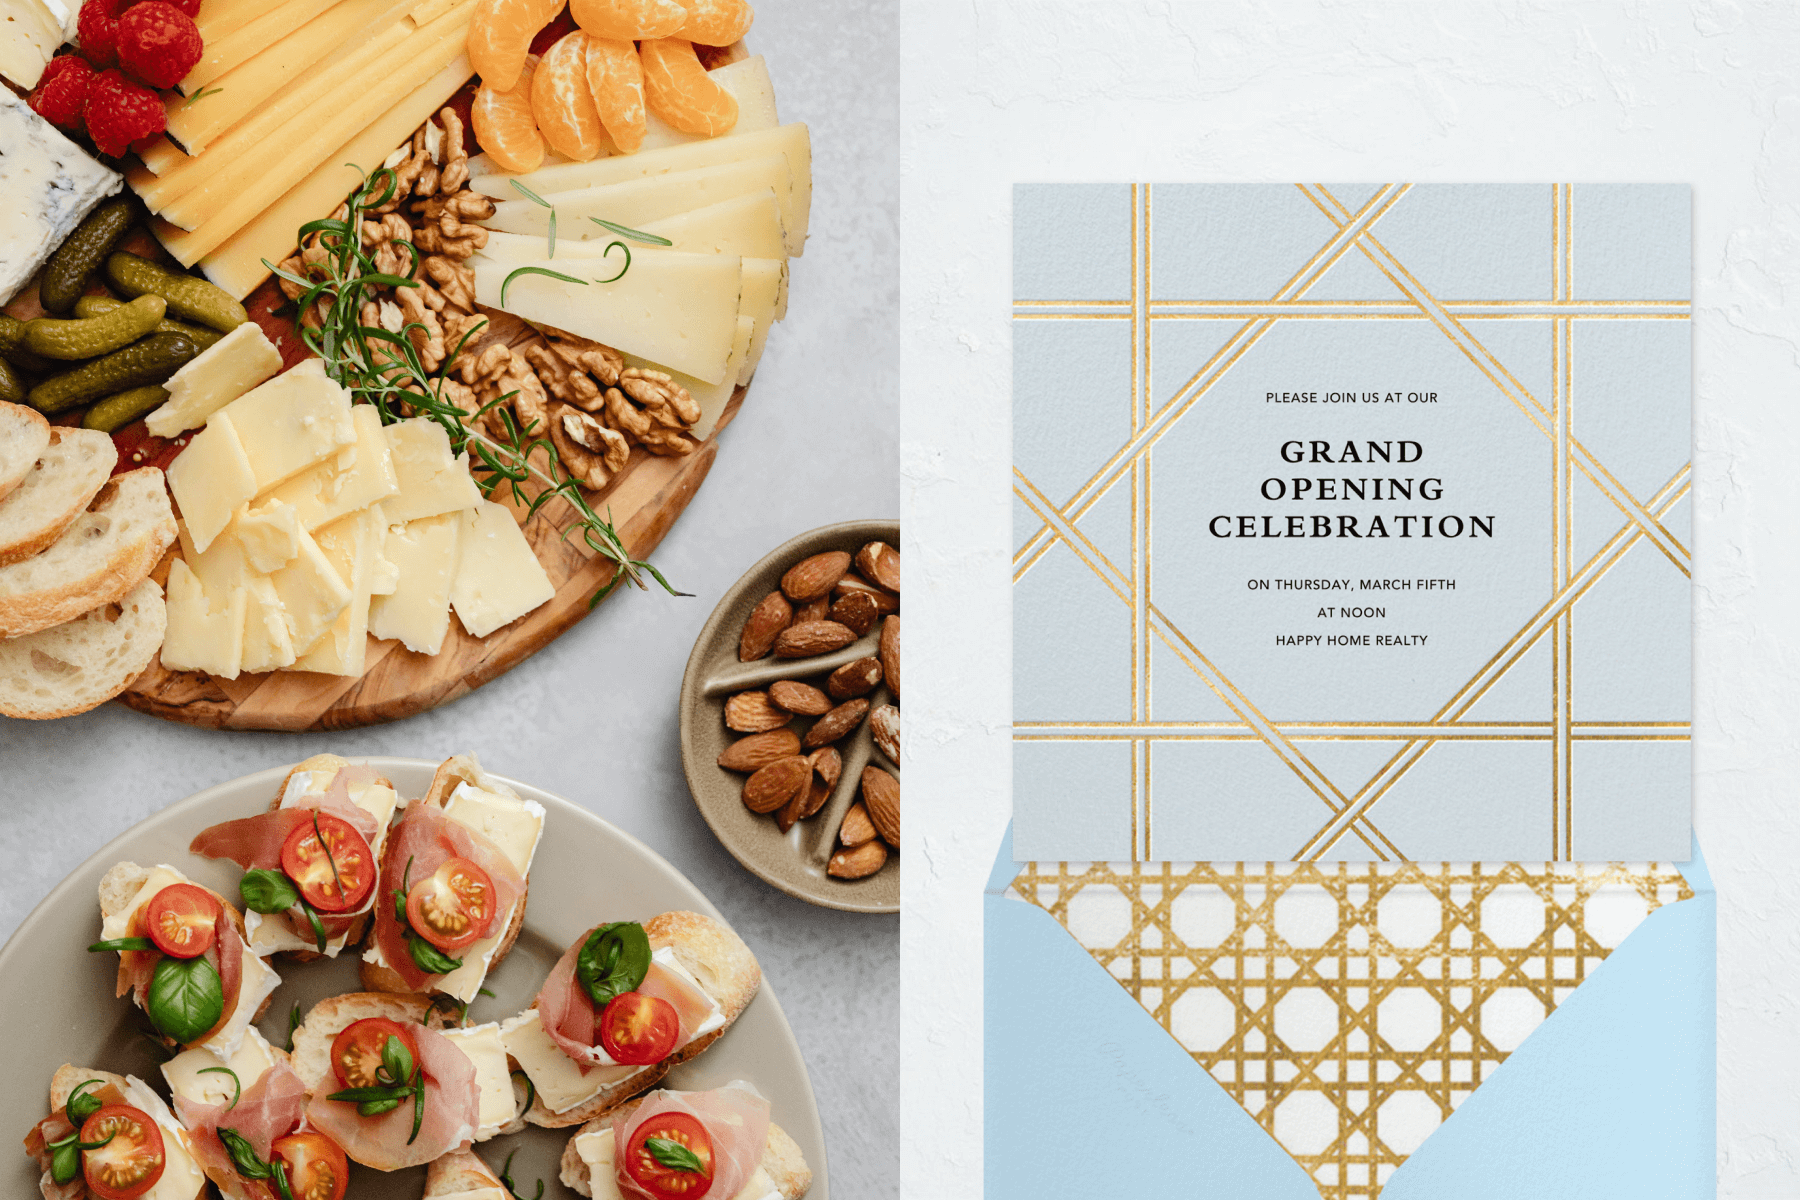 Cheese board and appetizers. Right: A light blue invitation with gold criss-crossed lines.